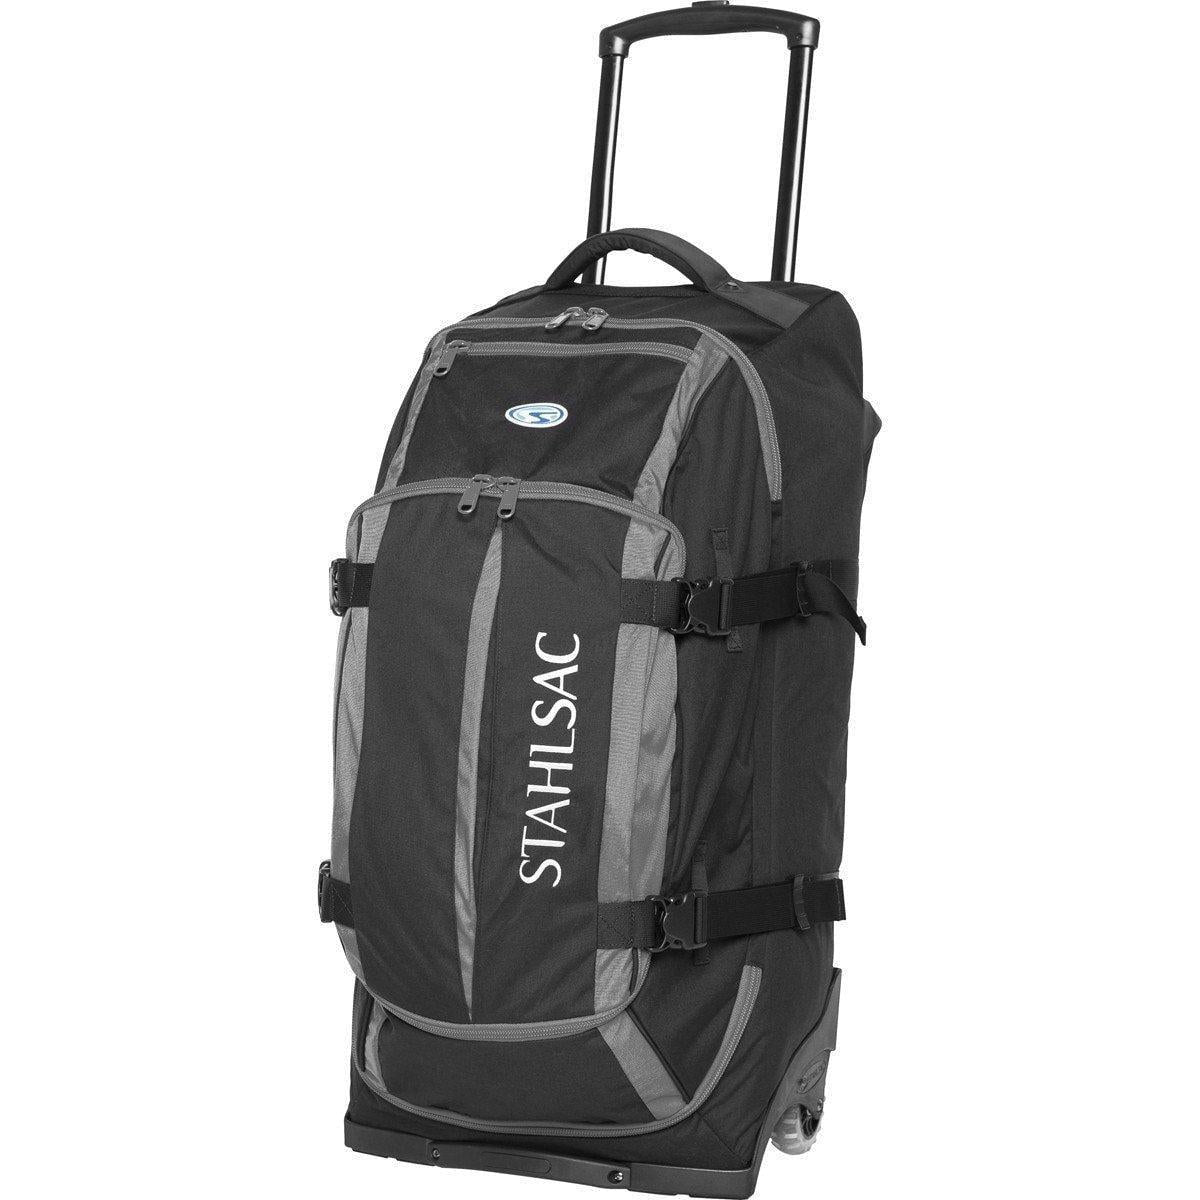 Stahlsac Curacao Clipper Dive Bag with Wheels